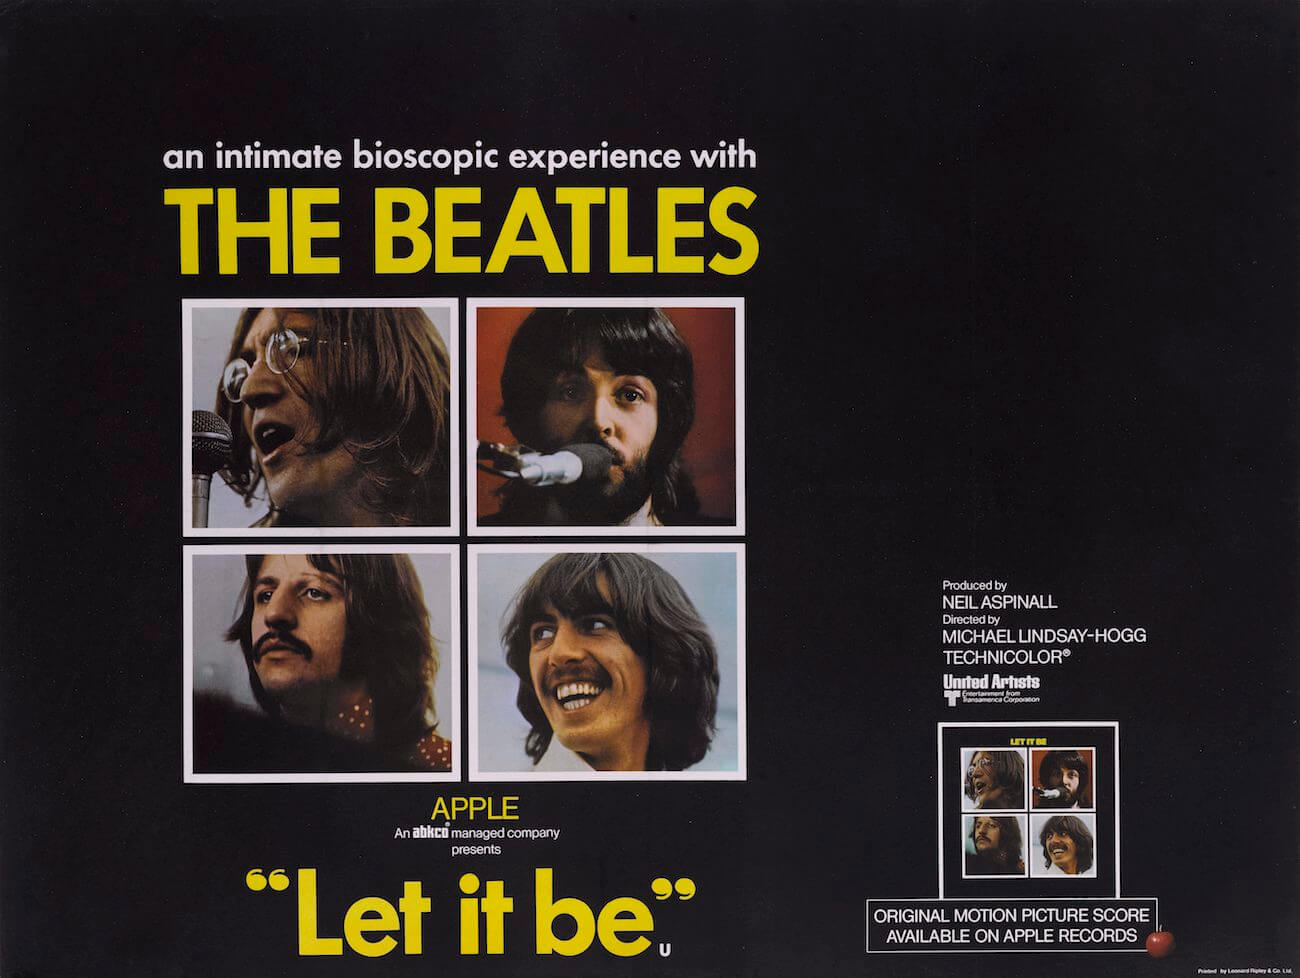 The Beatles released 'Let It Be' in 1970.